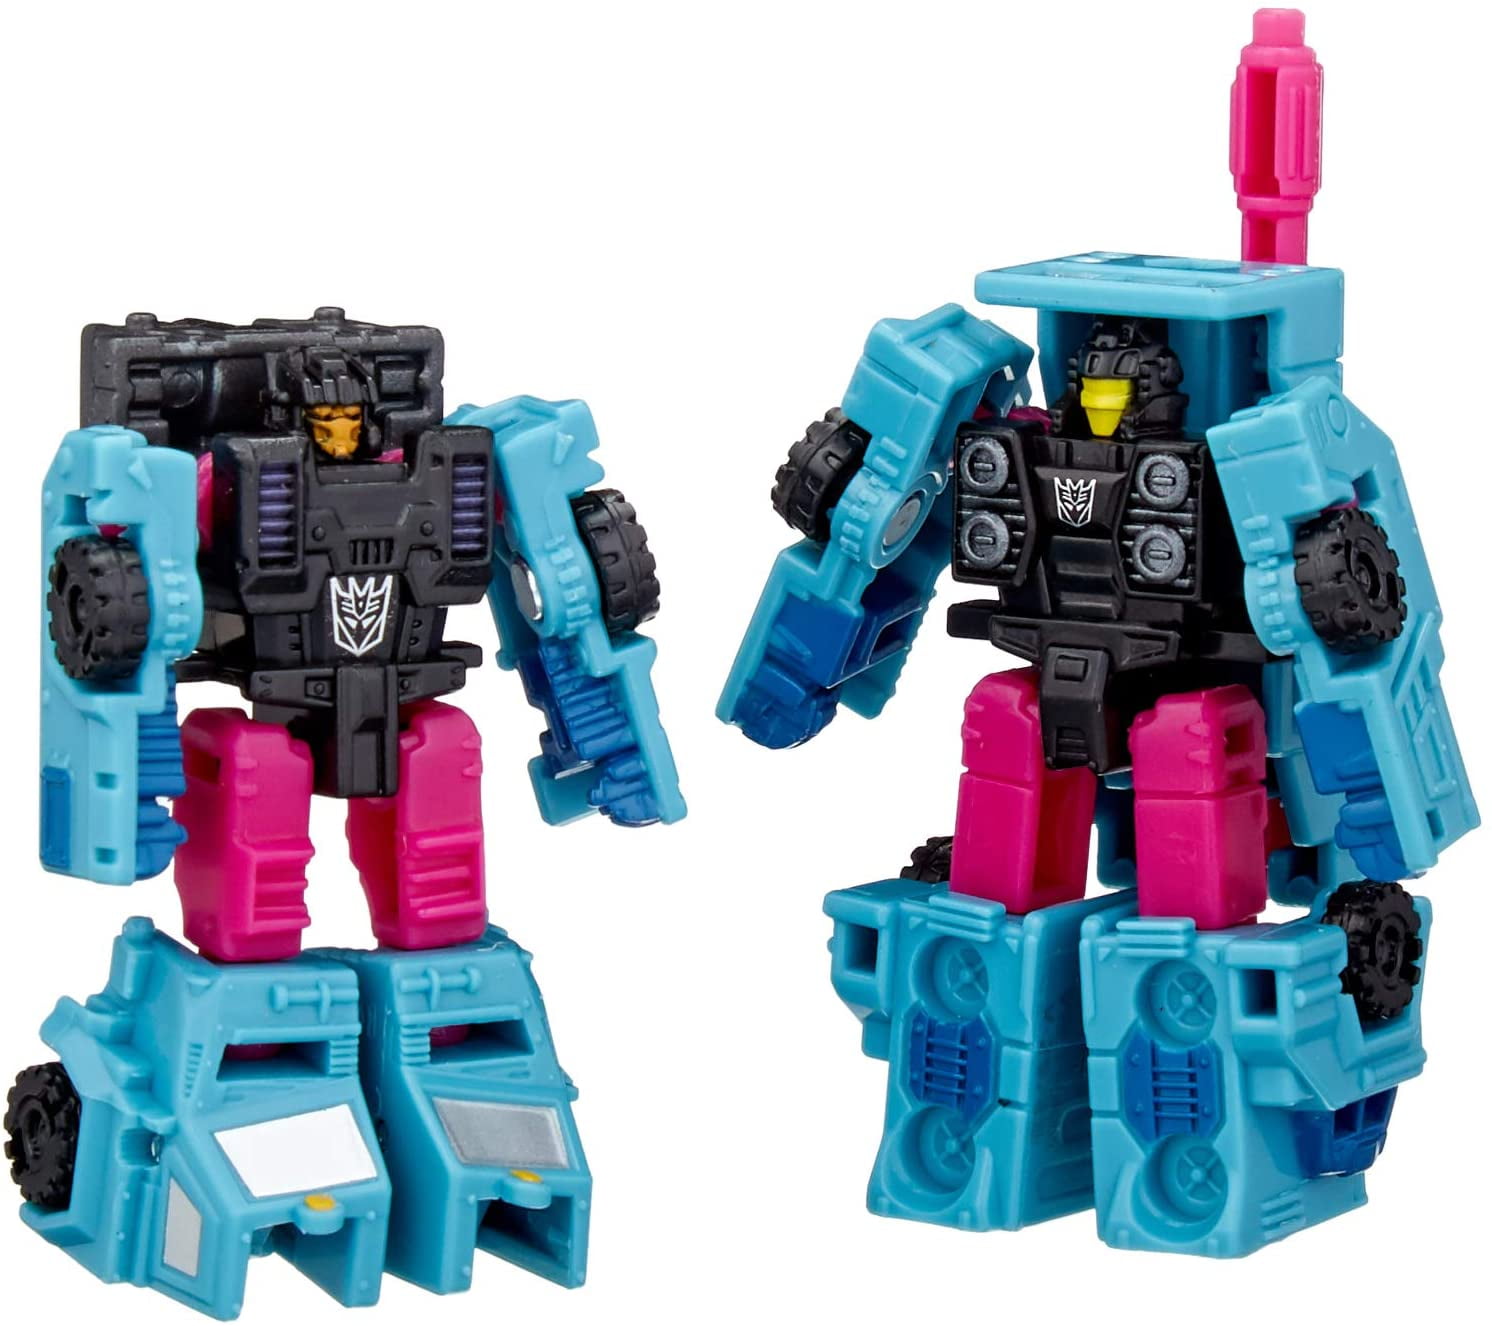 Transformers Toys Generations War for Cybertron: Earthrise Micromaster WFC-E40 Decepticon Battle Squad 2-Pack - Kids Ages 8 and Up, 1.5-inch, DISCOVER EARTHRISE: The.., By Brand Transformers